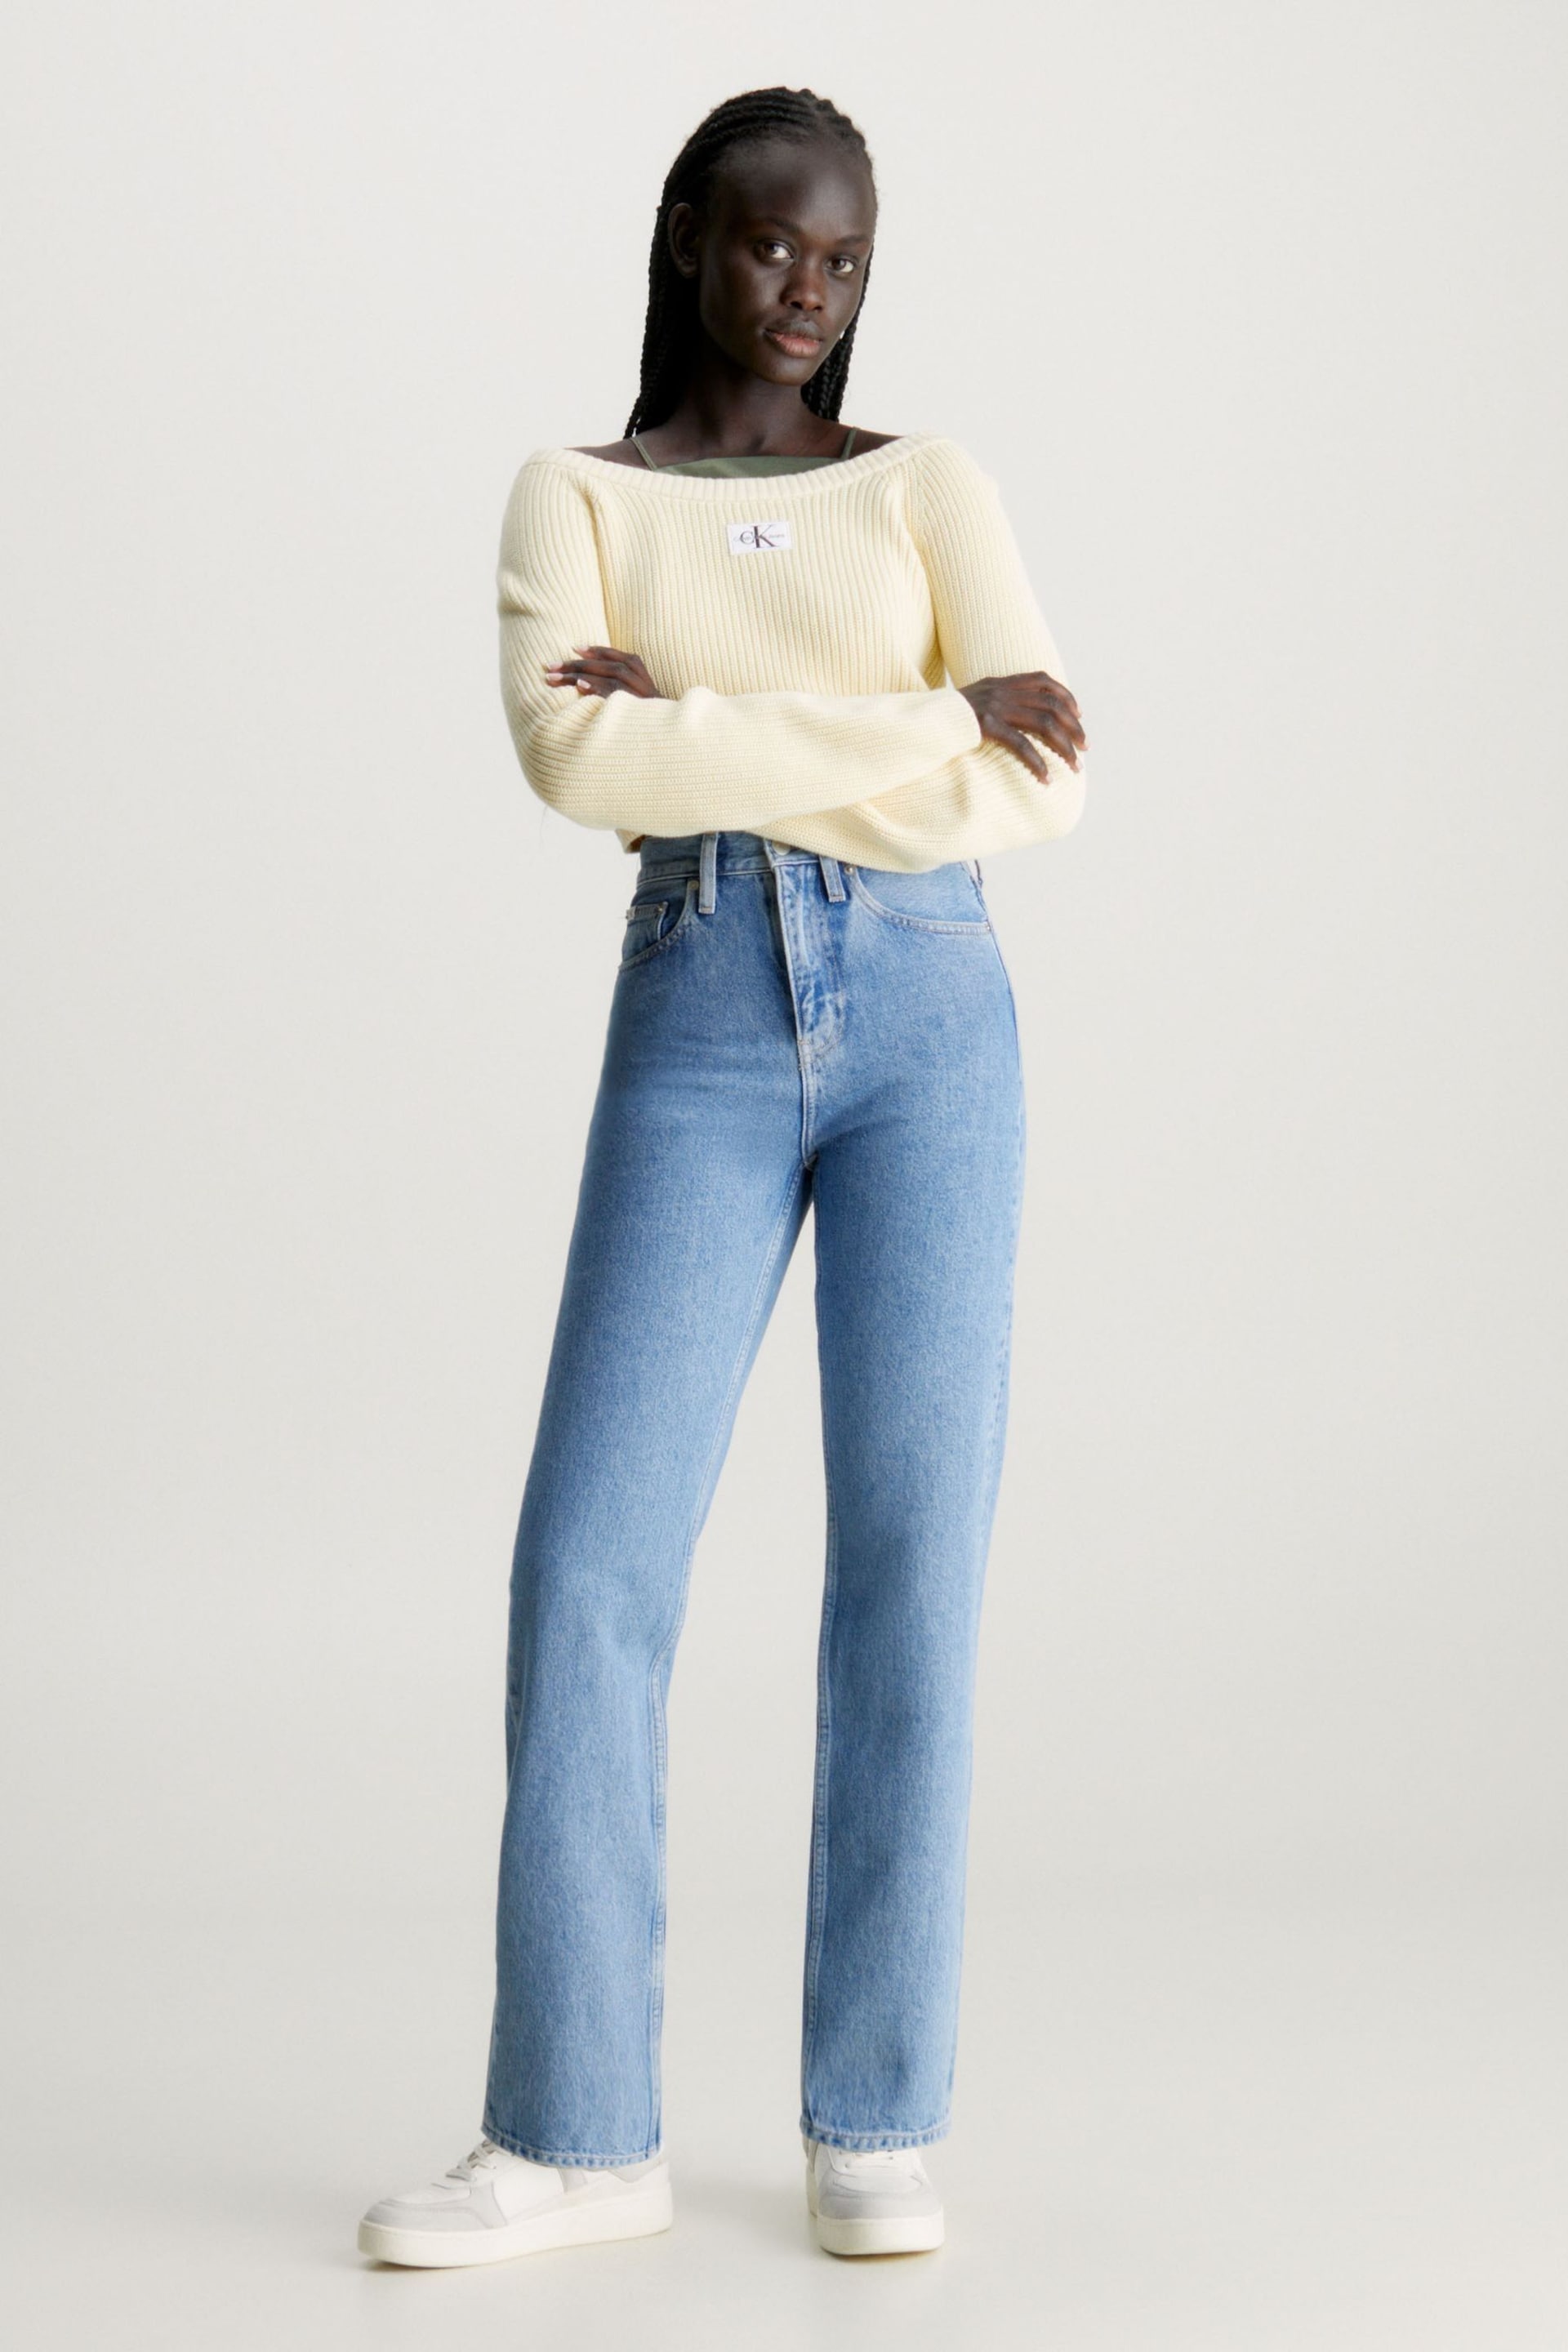 Calvin Klein Jeans Blue High Rise Straight Jeans - Image 5 of 7